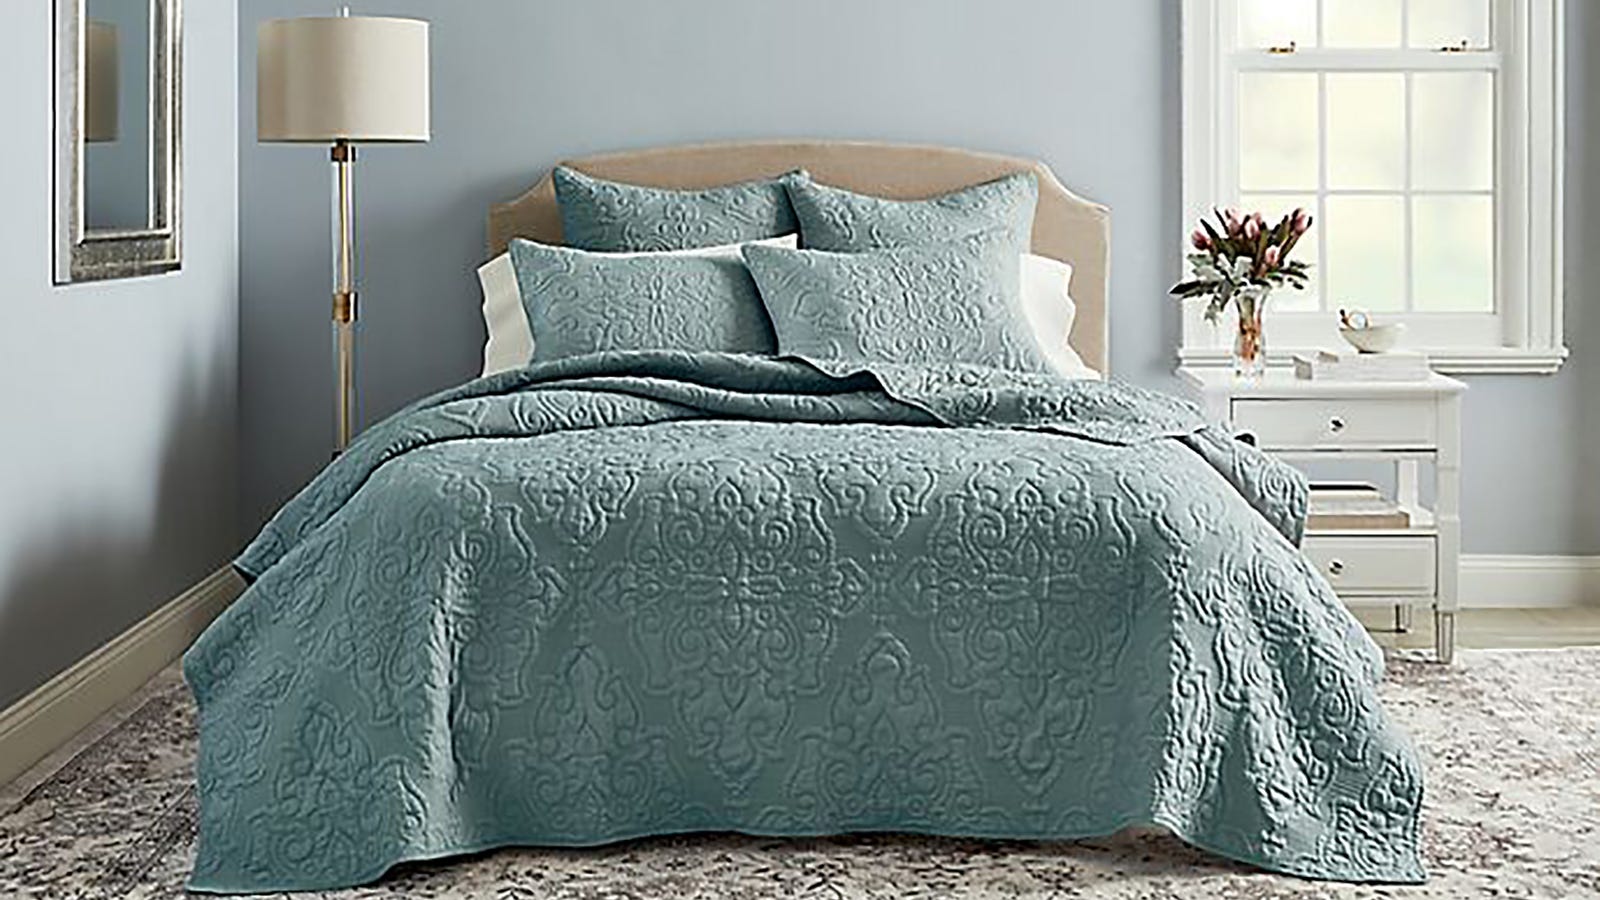 Bed Bath Beyond Get A Comforter For, King Size Comforters At Bed Bath And Beyond